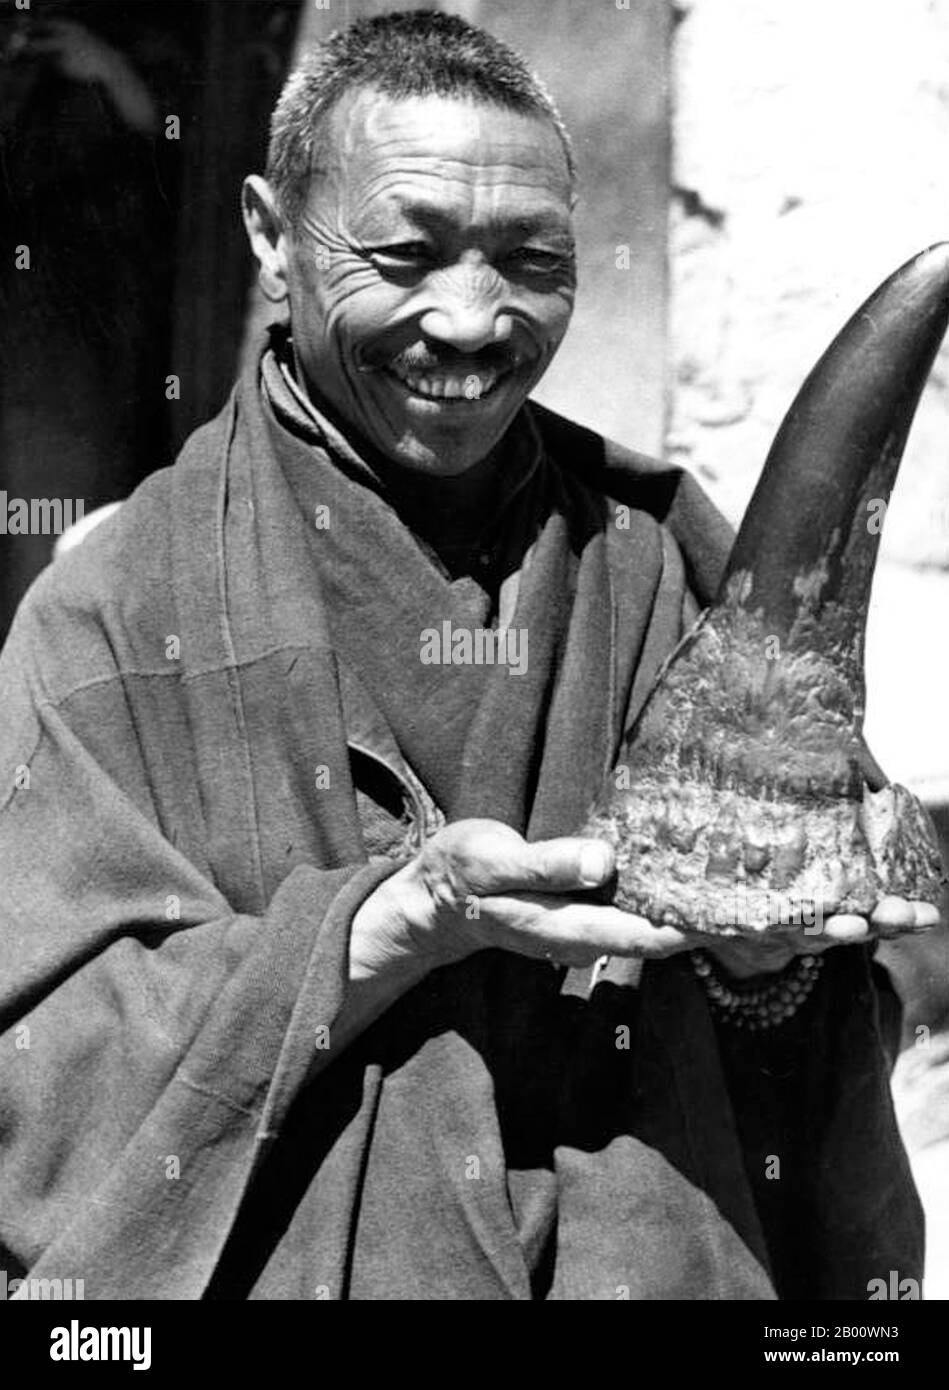 China/ Tibet: A Buddhist Monk with a rhinoceros horn, Samye. Photo by Ernst Schafer (1910-1992), Bundesarchiv, 1938 (CC BY-SA 3.0 License).  Rhinoceros horns, unlike those of other horned mammals, consist of keratin only and lack a bony core, such as bovine horns. Rhinoceros horns are used in traditional Asian medicine, and for dagger handles in Yemen and Oman. One repeated misconception is that rhinoceros horn in powdered form is used as an aphrodisiac in Traditional Chinese Medicine.  It is, in fact, prescribed for fevers and convulsions. China has signed the CITES treaty however. Stock Photo